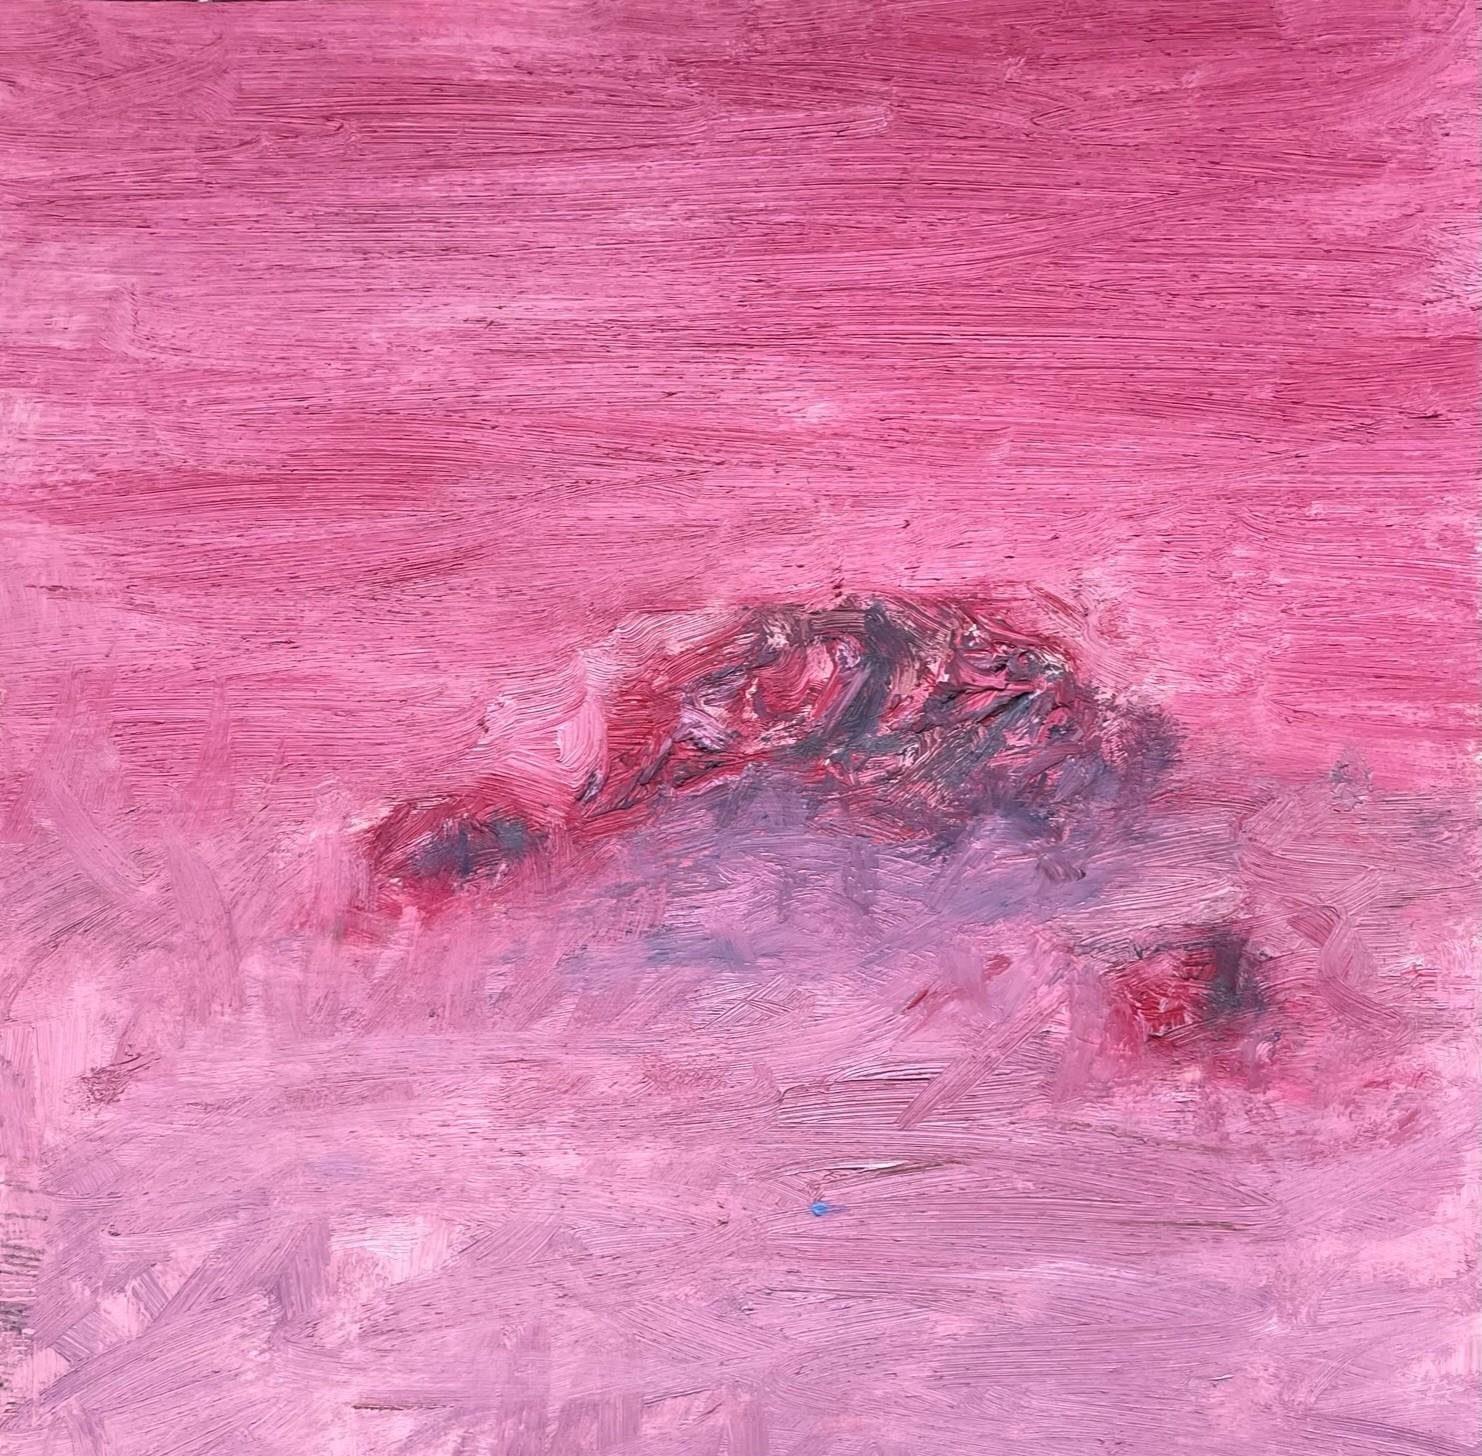 Remains (Body in the Field 10) - 21st Century, Abstract, Pink, Contemporary - Art by Zsolt Berszán